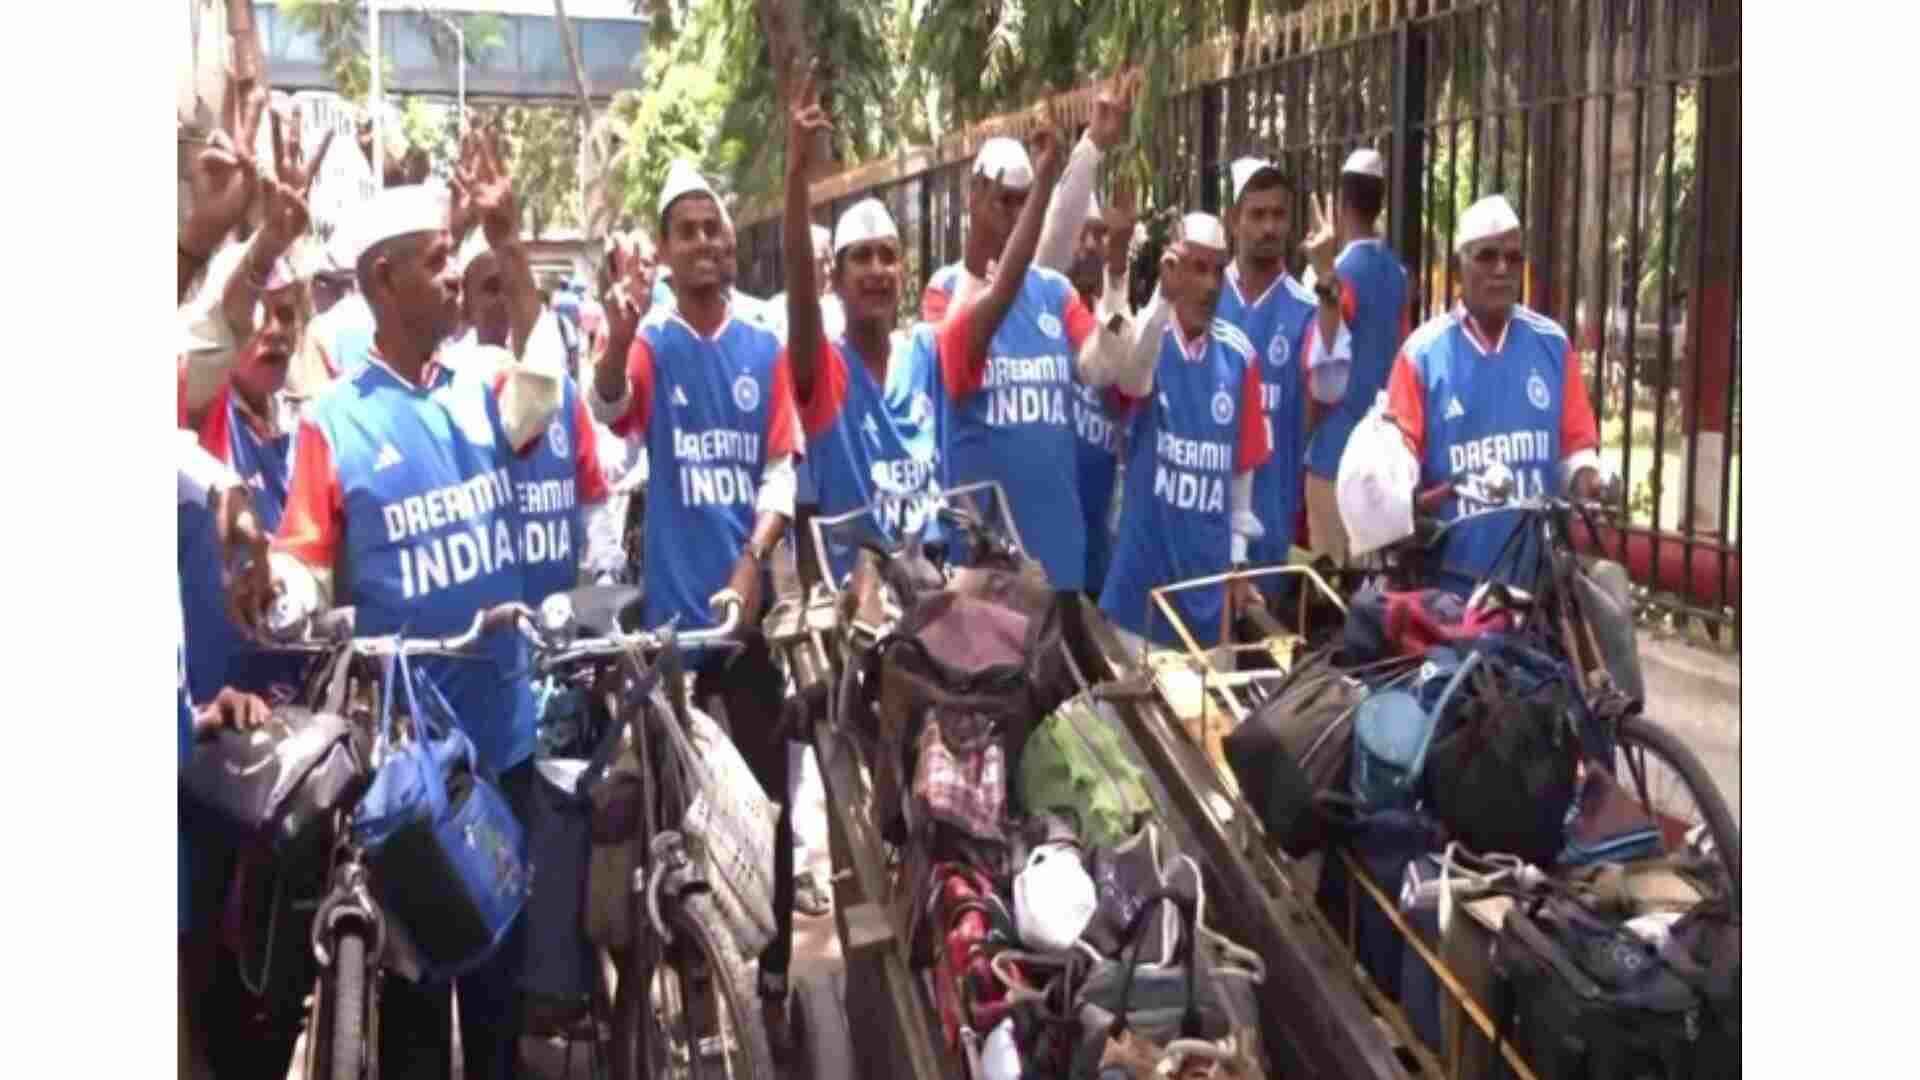 Dabbawallahs Wear Team India Jerseys, Extend Support To Team India Ahead Of T20 WC